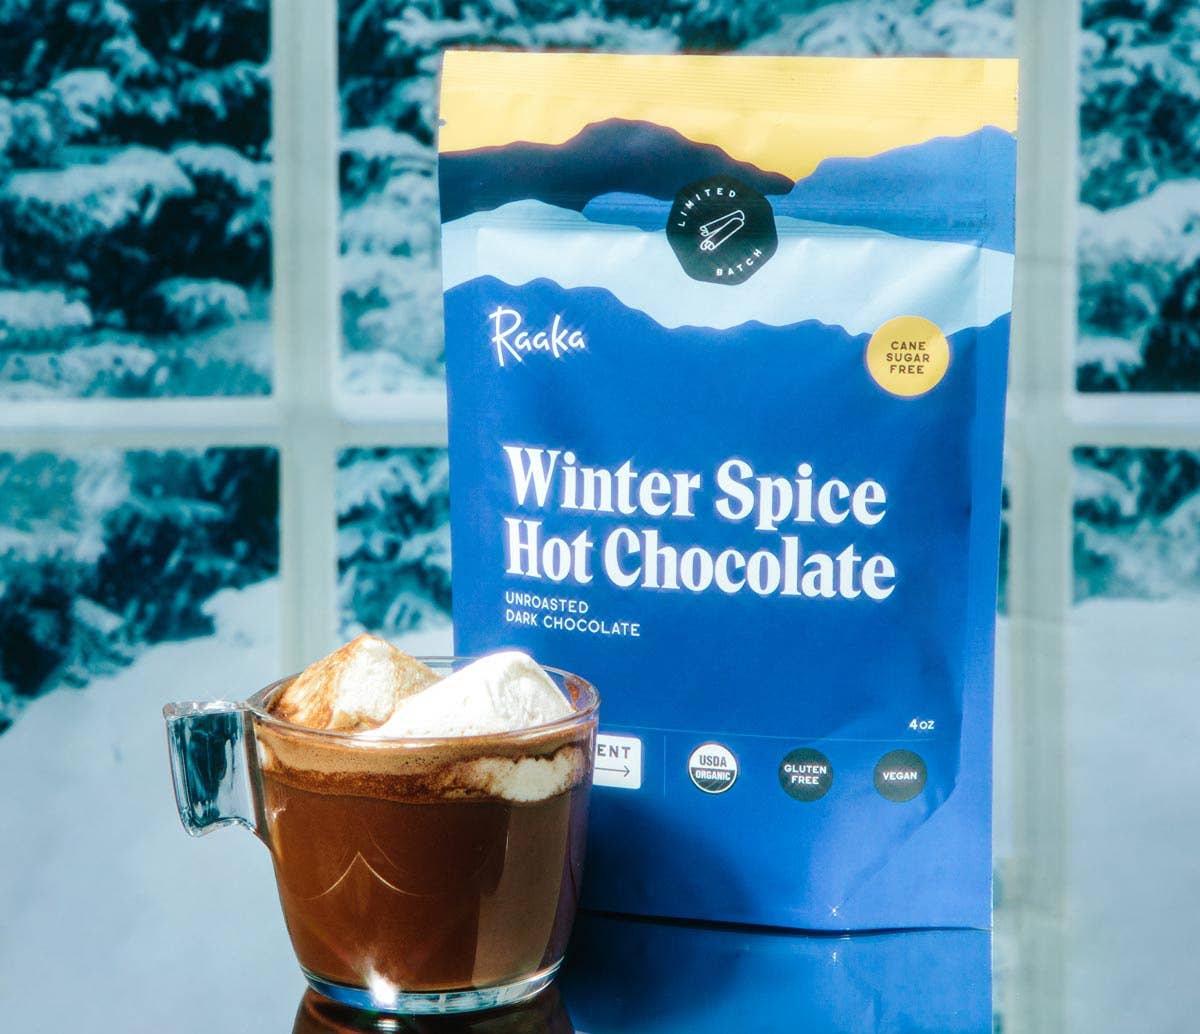 Winter Spice Hot Chocolate - Holiday Limited Batch